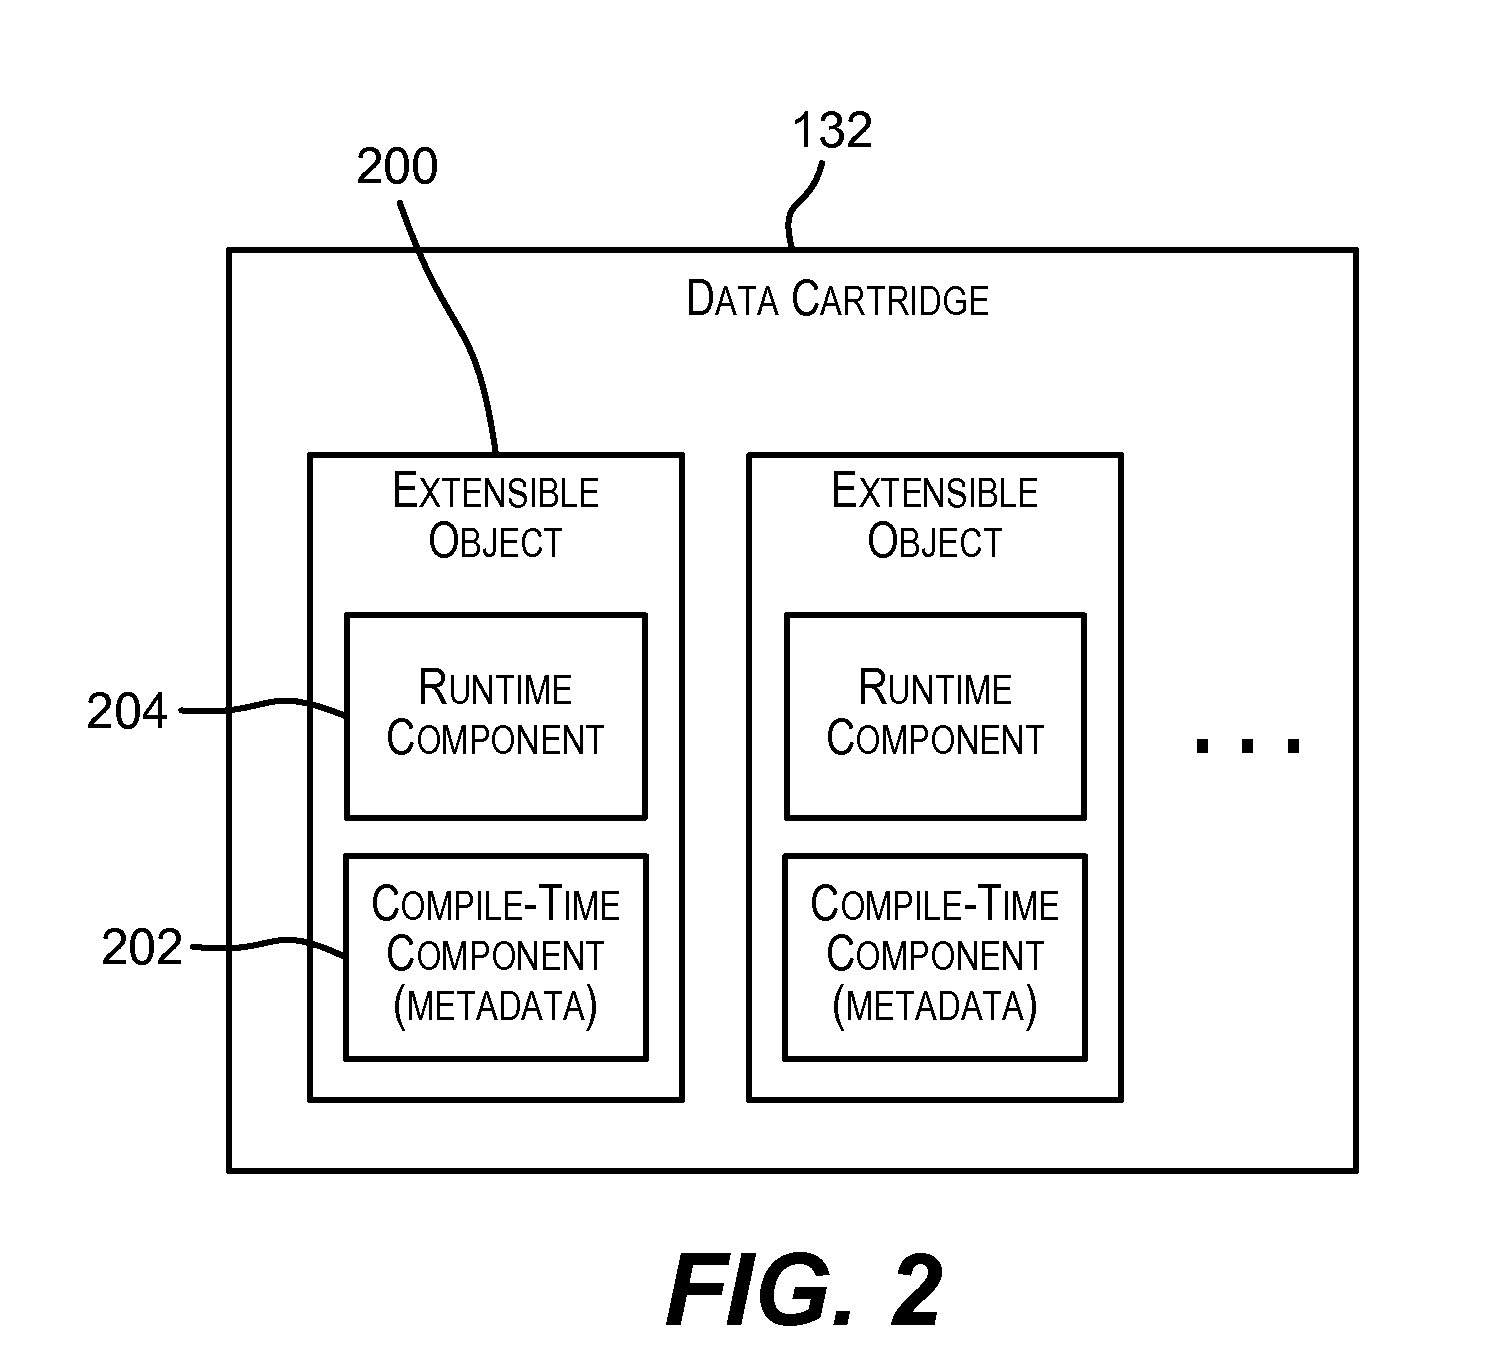 Spatial data cartridge for event processing systems